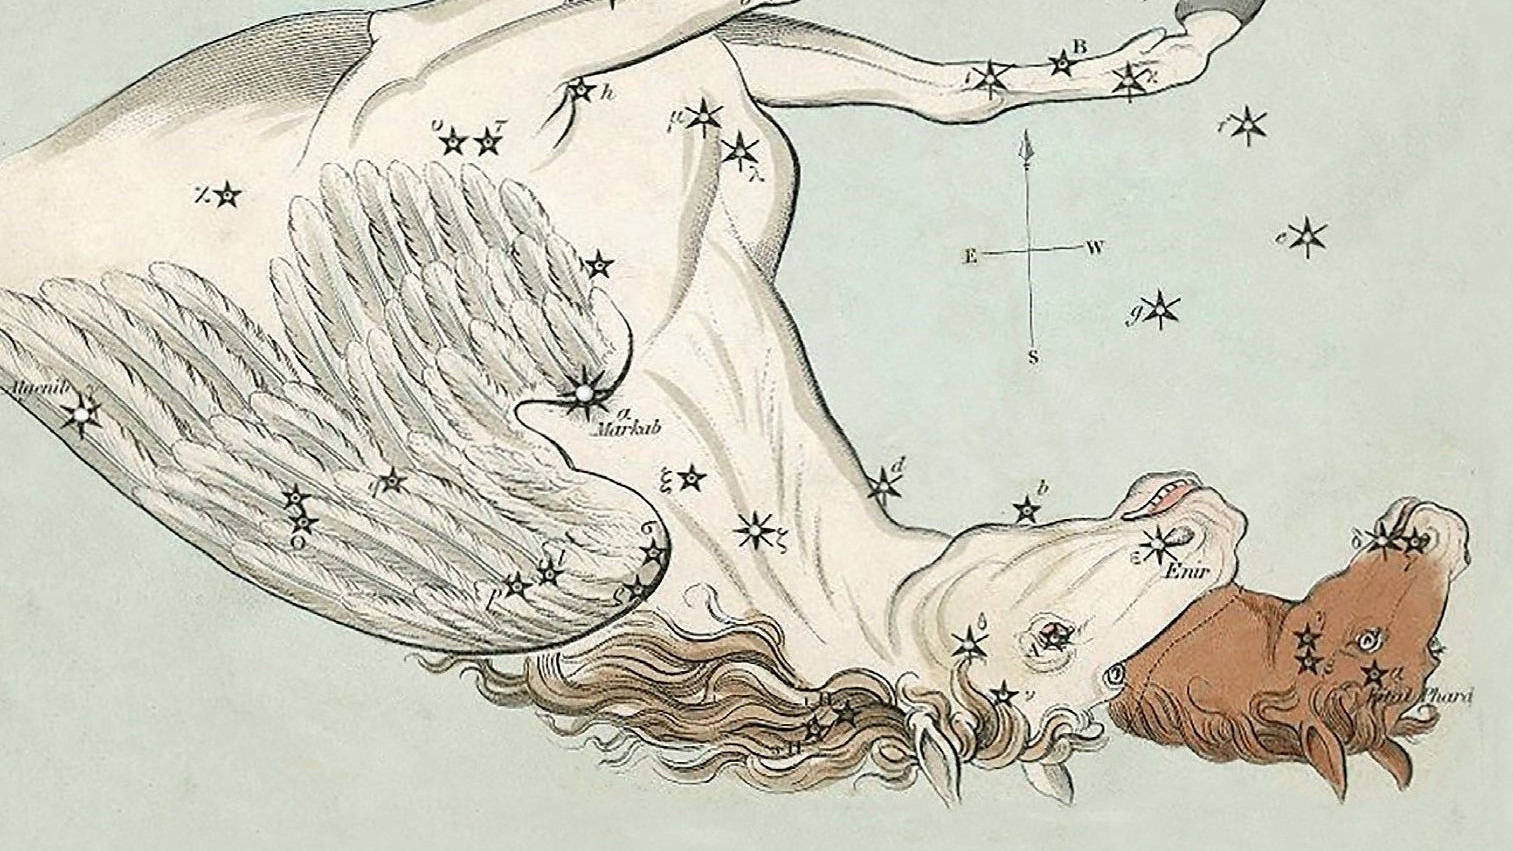 Historic illustrations show the winged horse falling upside down from the sky.
The small equine head to the right belongs to the constellation of Equuleus. It represents the foal Celeris,
which was said to be either the son or brother of Pegasus.